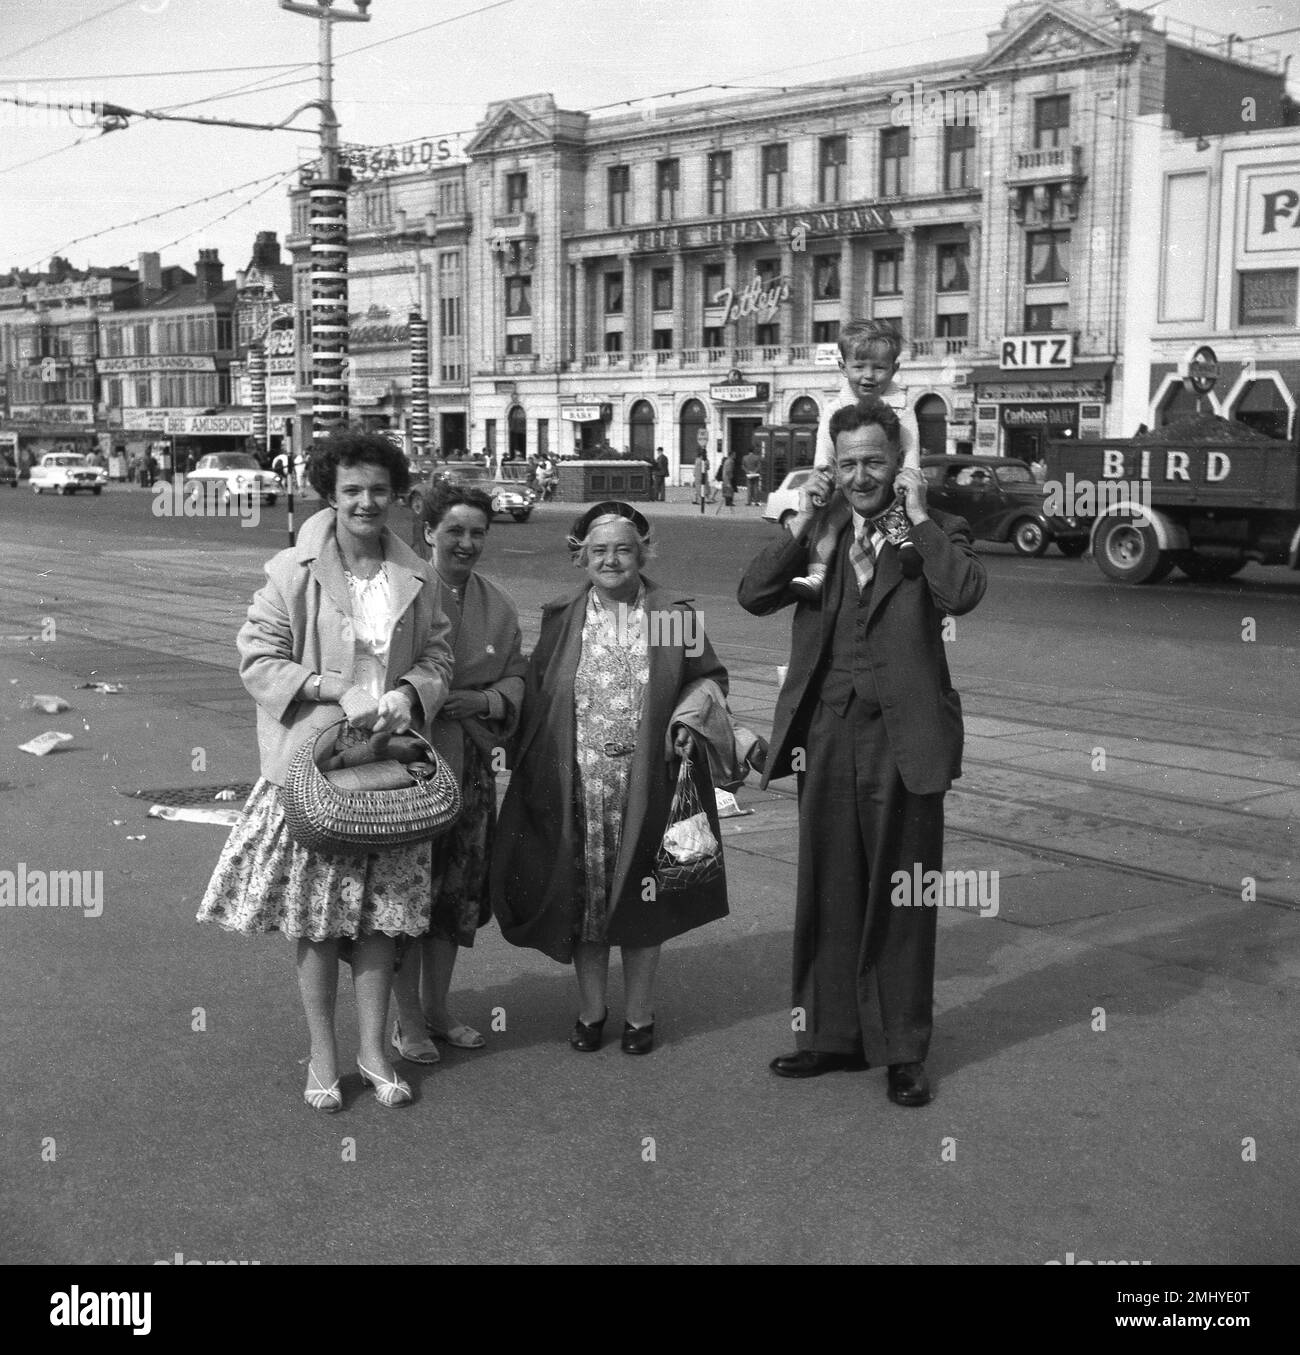 1950s, historical, a working class family standing for a photo on the promenade at Blackpool, England, UK. On the street behind, on the Royal Princes Parade, cars of the era. The Huntsman, Ritz, Tassauds (Waxworks) are names on the buildings. The family are formally dressed, as people dis on holiday on this era, the gentleman, with a little boy on his shoulders, is wearing a three-piece sit & tie, and the women in flower dresses and long coats. Stock Photo